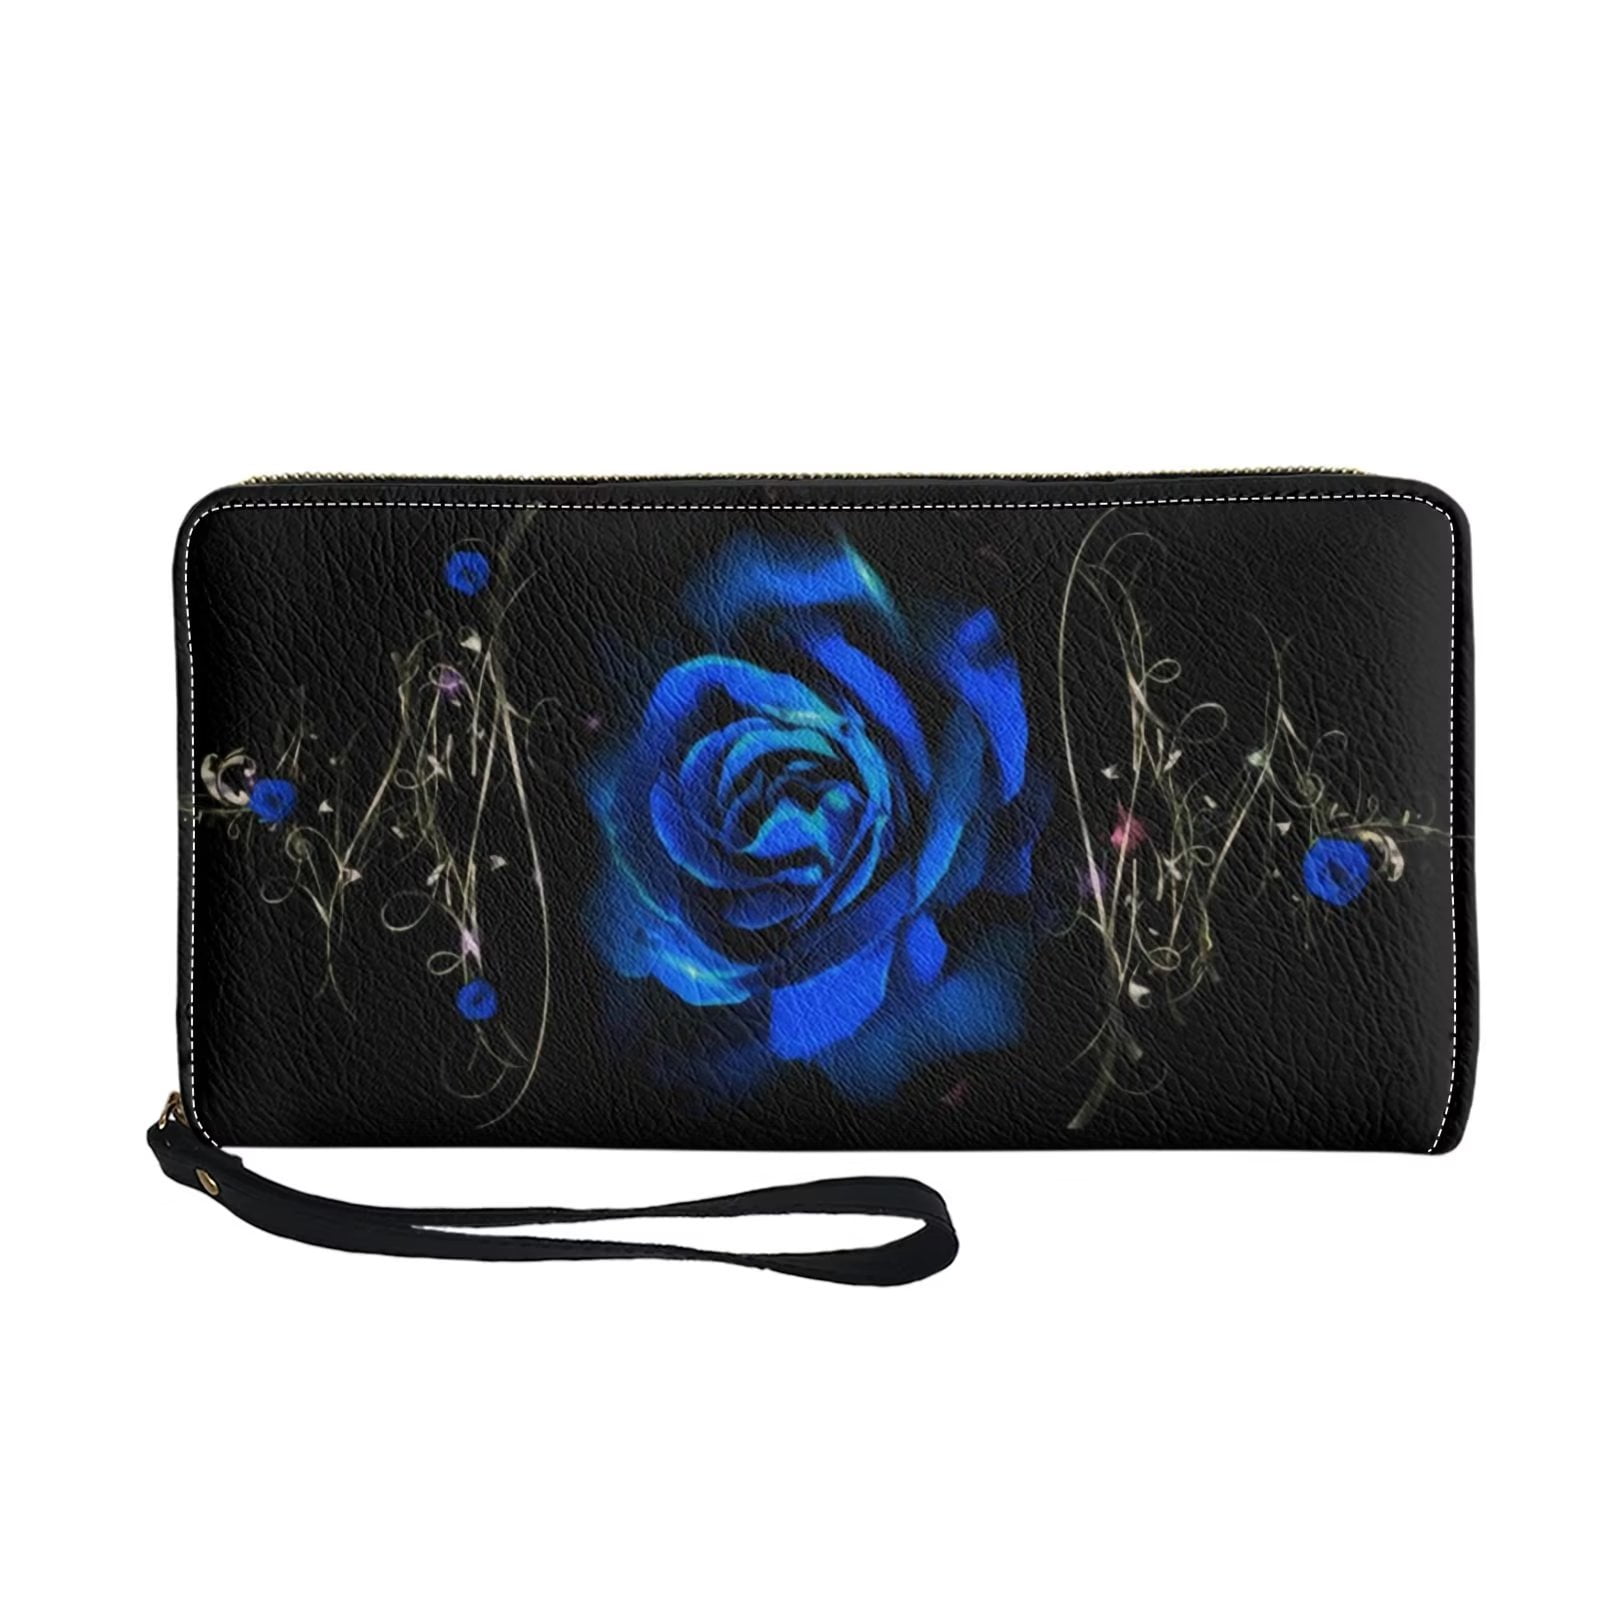 Buy Coin Purse,Lady Vintage Floral Mini Wallet Clasp Closure Classic Rose  Pattern Clutch Bag (Blue) at Amazon.in